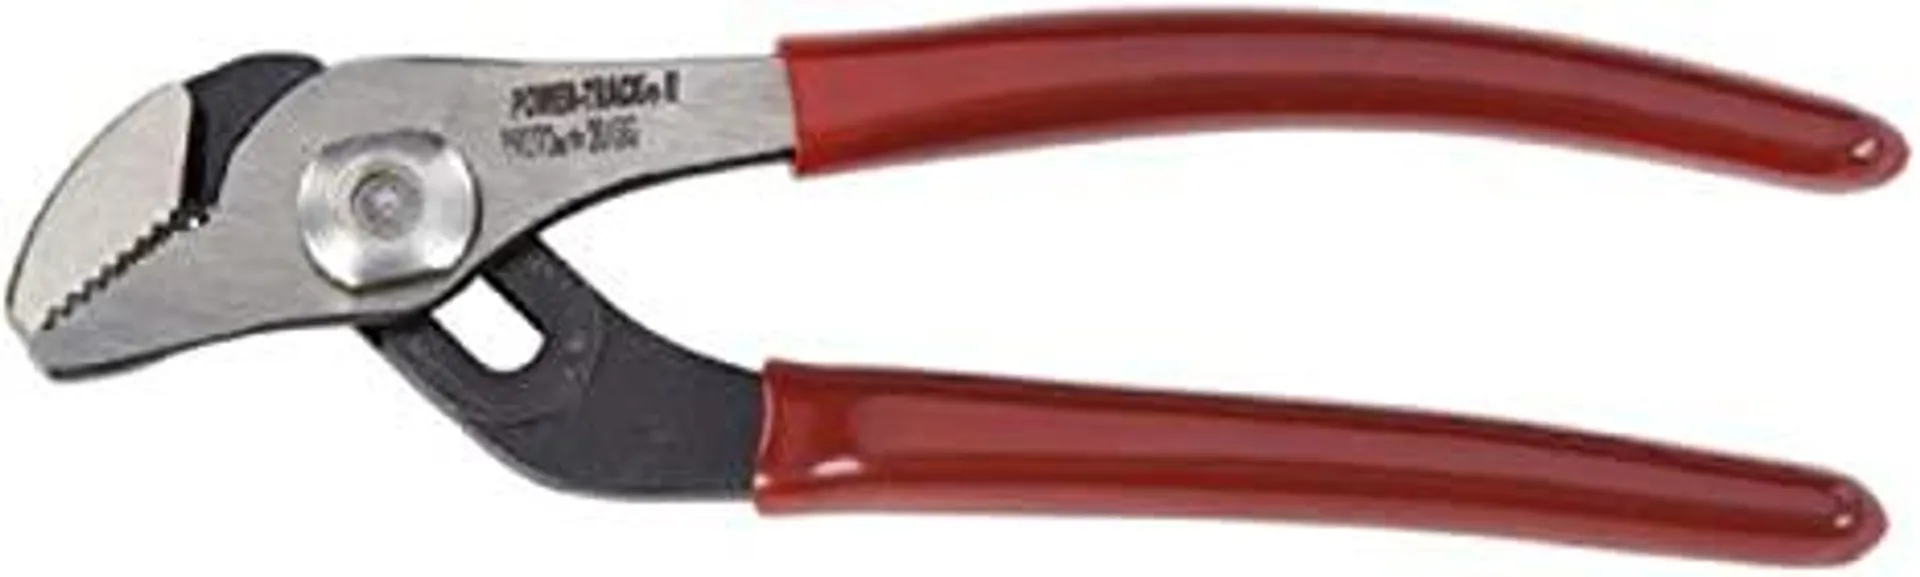 Stanley J260SG Proto 10-3/16" Tongue&Groove Power-Track II Pliers w/Grip